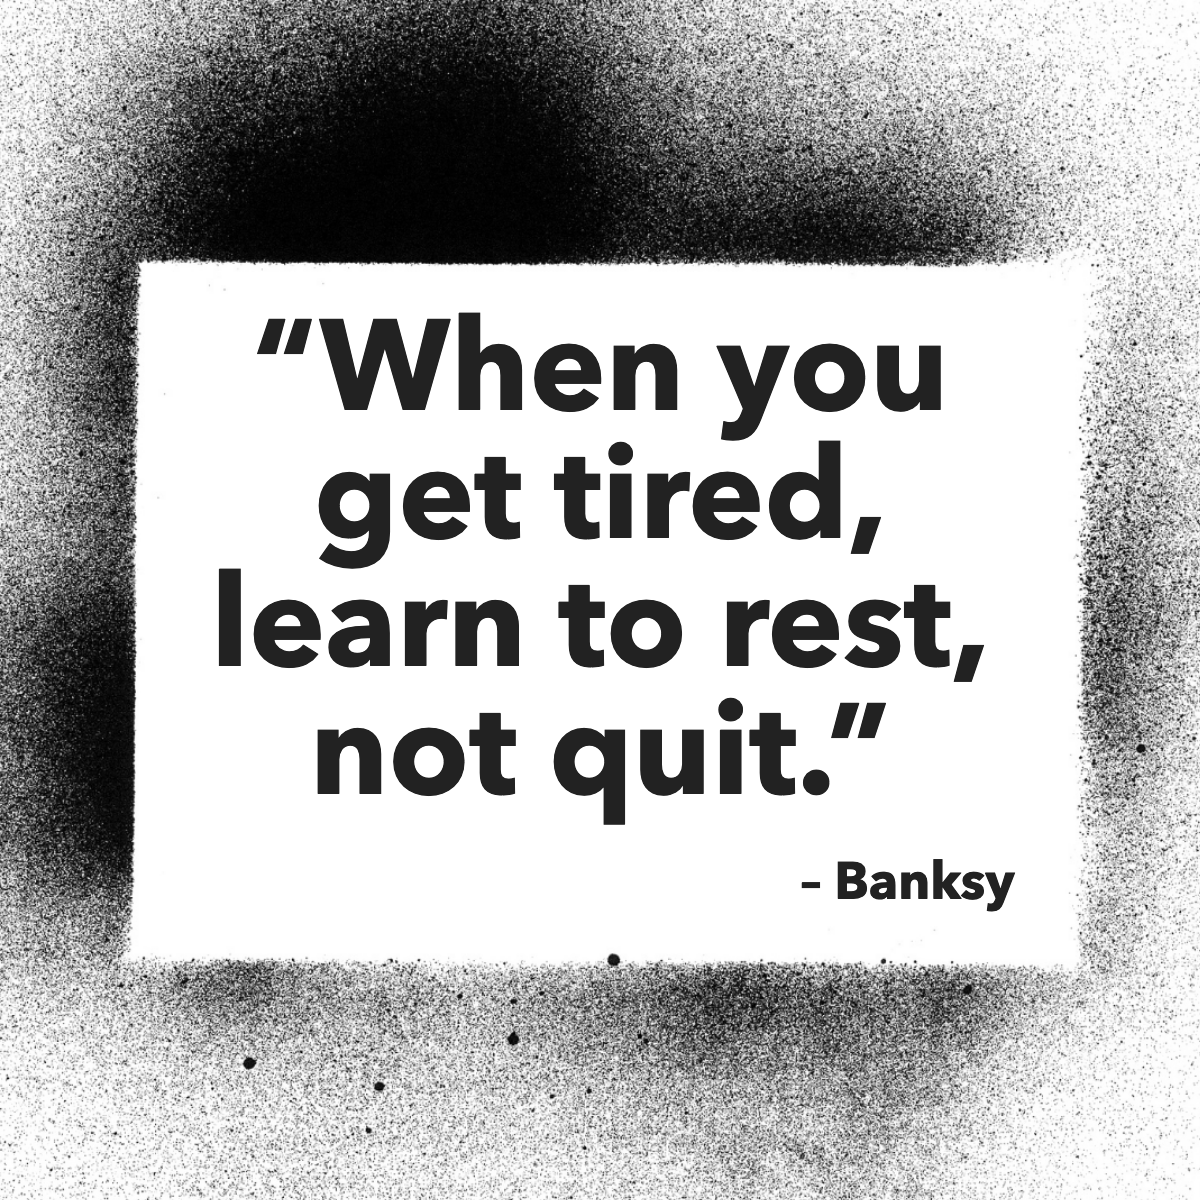 Don't feel guilty if you ever get tired, take your time ... 😉

#motivationnation    #motivationalquotesdaily    #quoteoftheday    #quoteofday    #quotedaily

#longandfosterrealestate #thebesthouse #realorlife #homebuying #homeselling